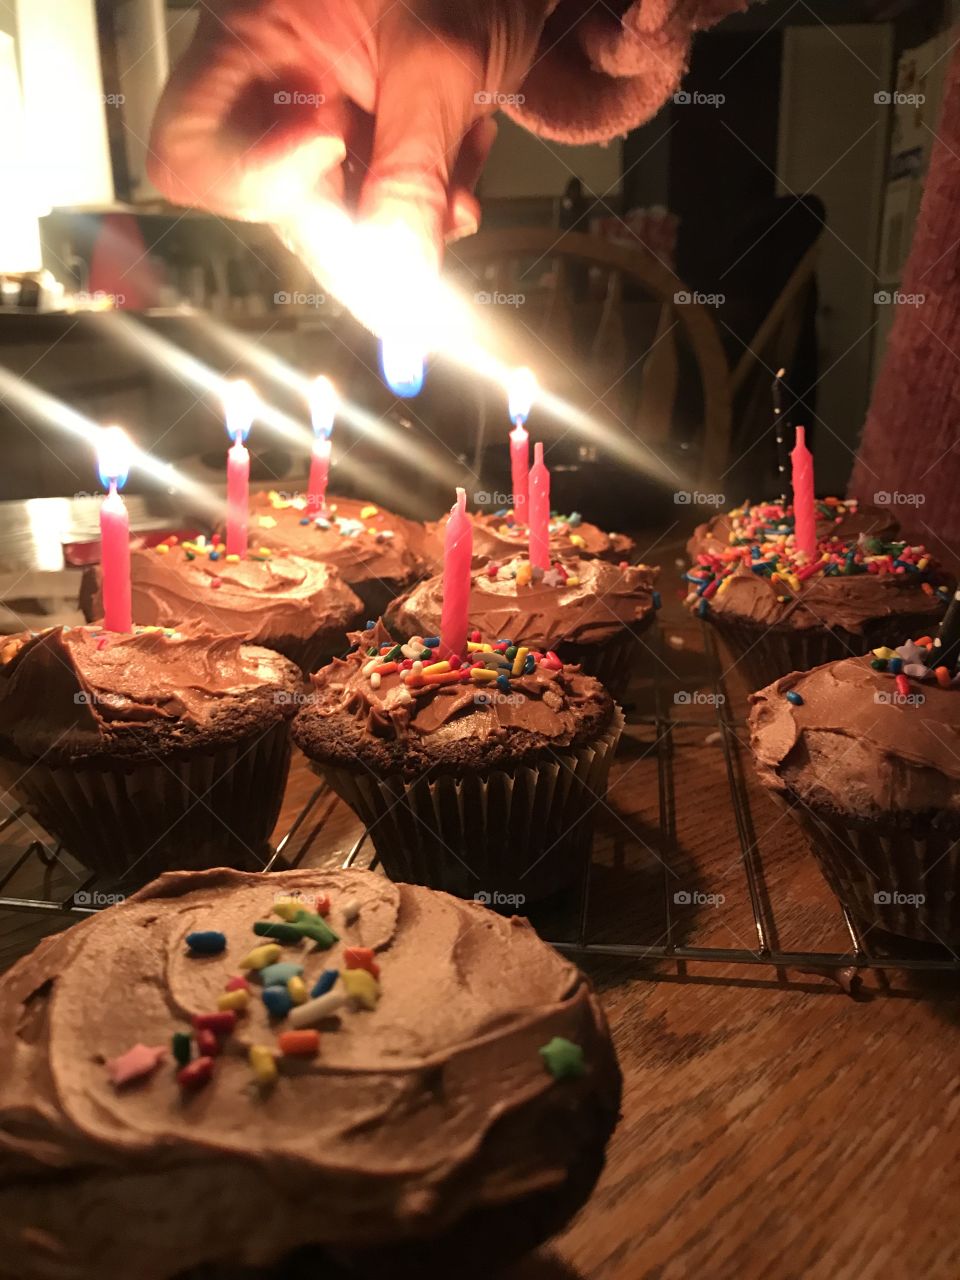 Lighting candles on birthday cupcakes, colorful, chocolate cupcakes with rainbow sprinkles, handmade with love, toddler birthday, birthday party 